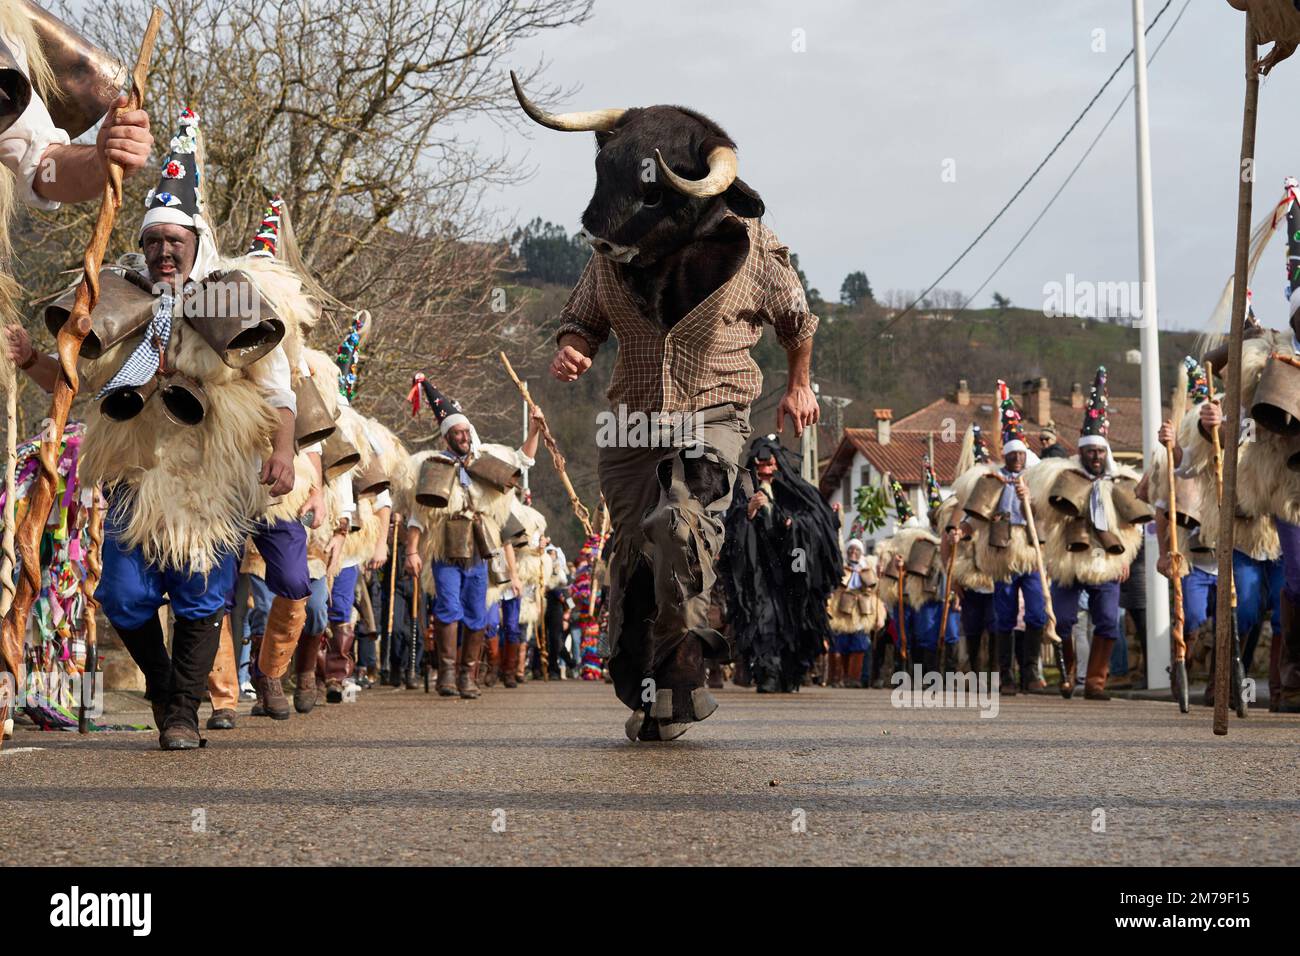 08 January 2023, Spain, Silió: The bull runs through the streets among the 'Zarramacos', the warriors of good. The Vijanera, a traditional carnival in northern Spain, is an ethnographic celebration that takes place at the winter solstice. Villagers dressed in natural costumes dance loudly to welcome the New Year and drive away evil spirits. Photo: Felipe Passolas/dpa Stock Photo